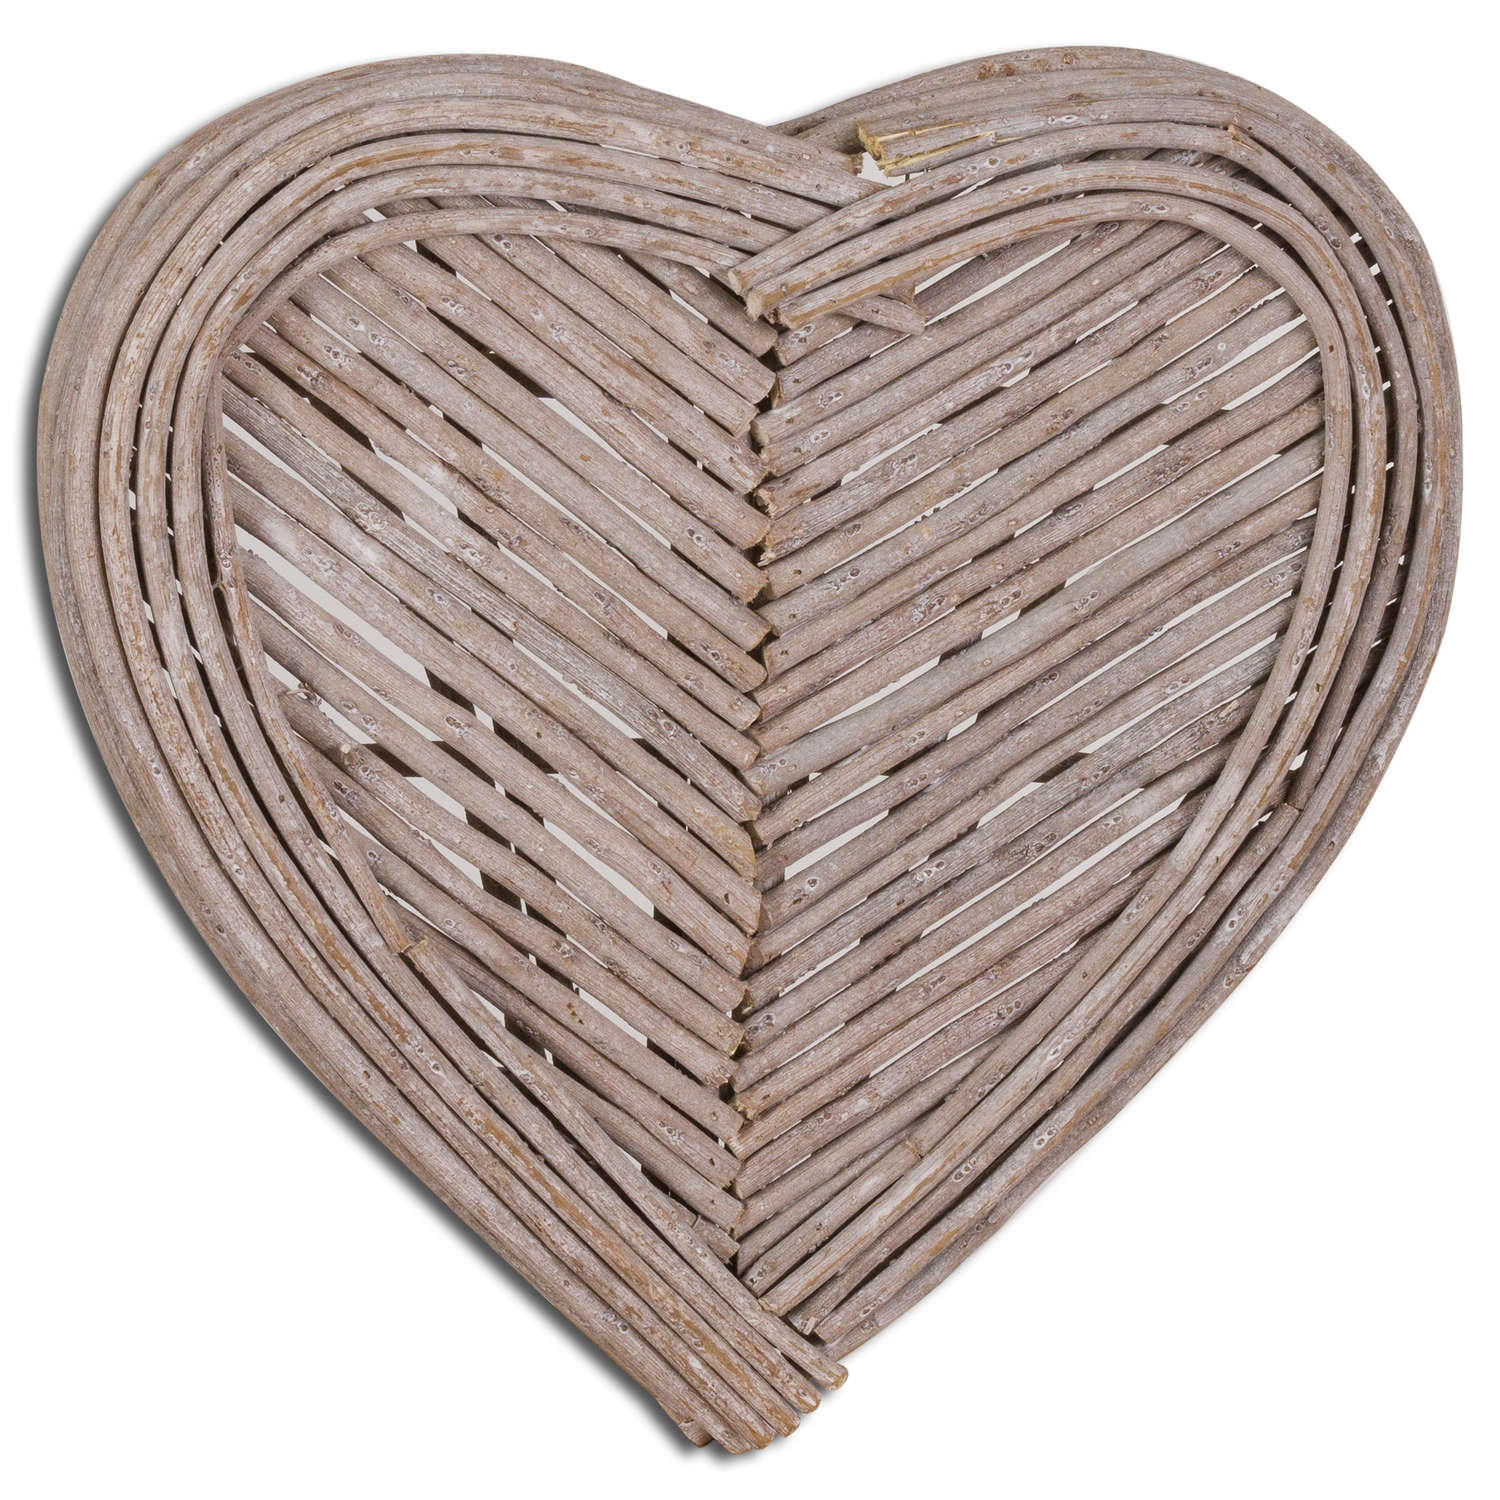 Natural Wicker Heart - Small